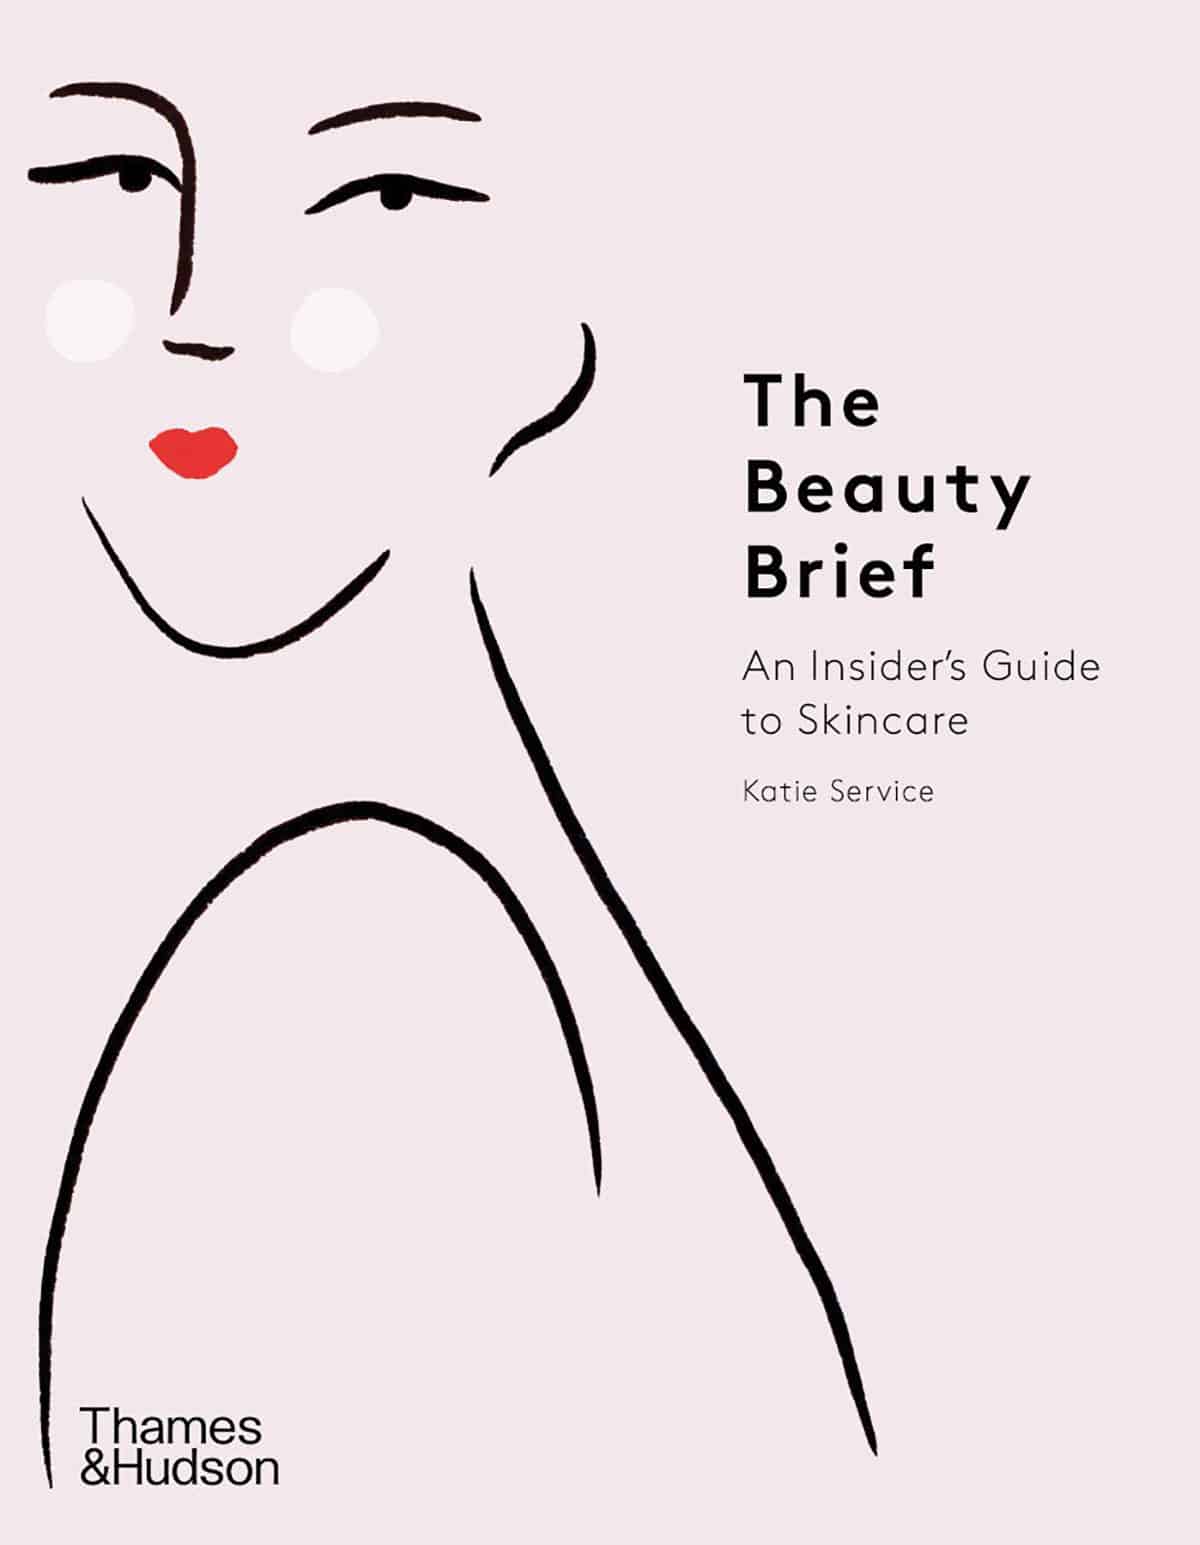 THE BEAUTY BRIEF